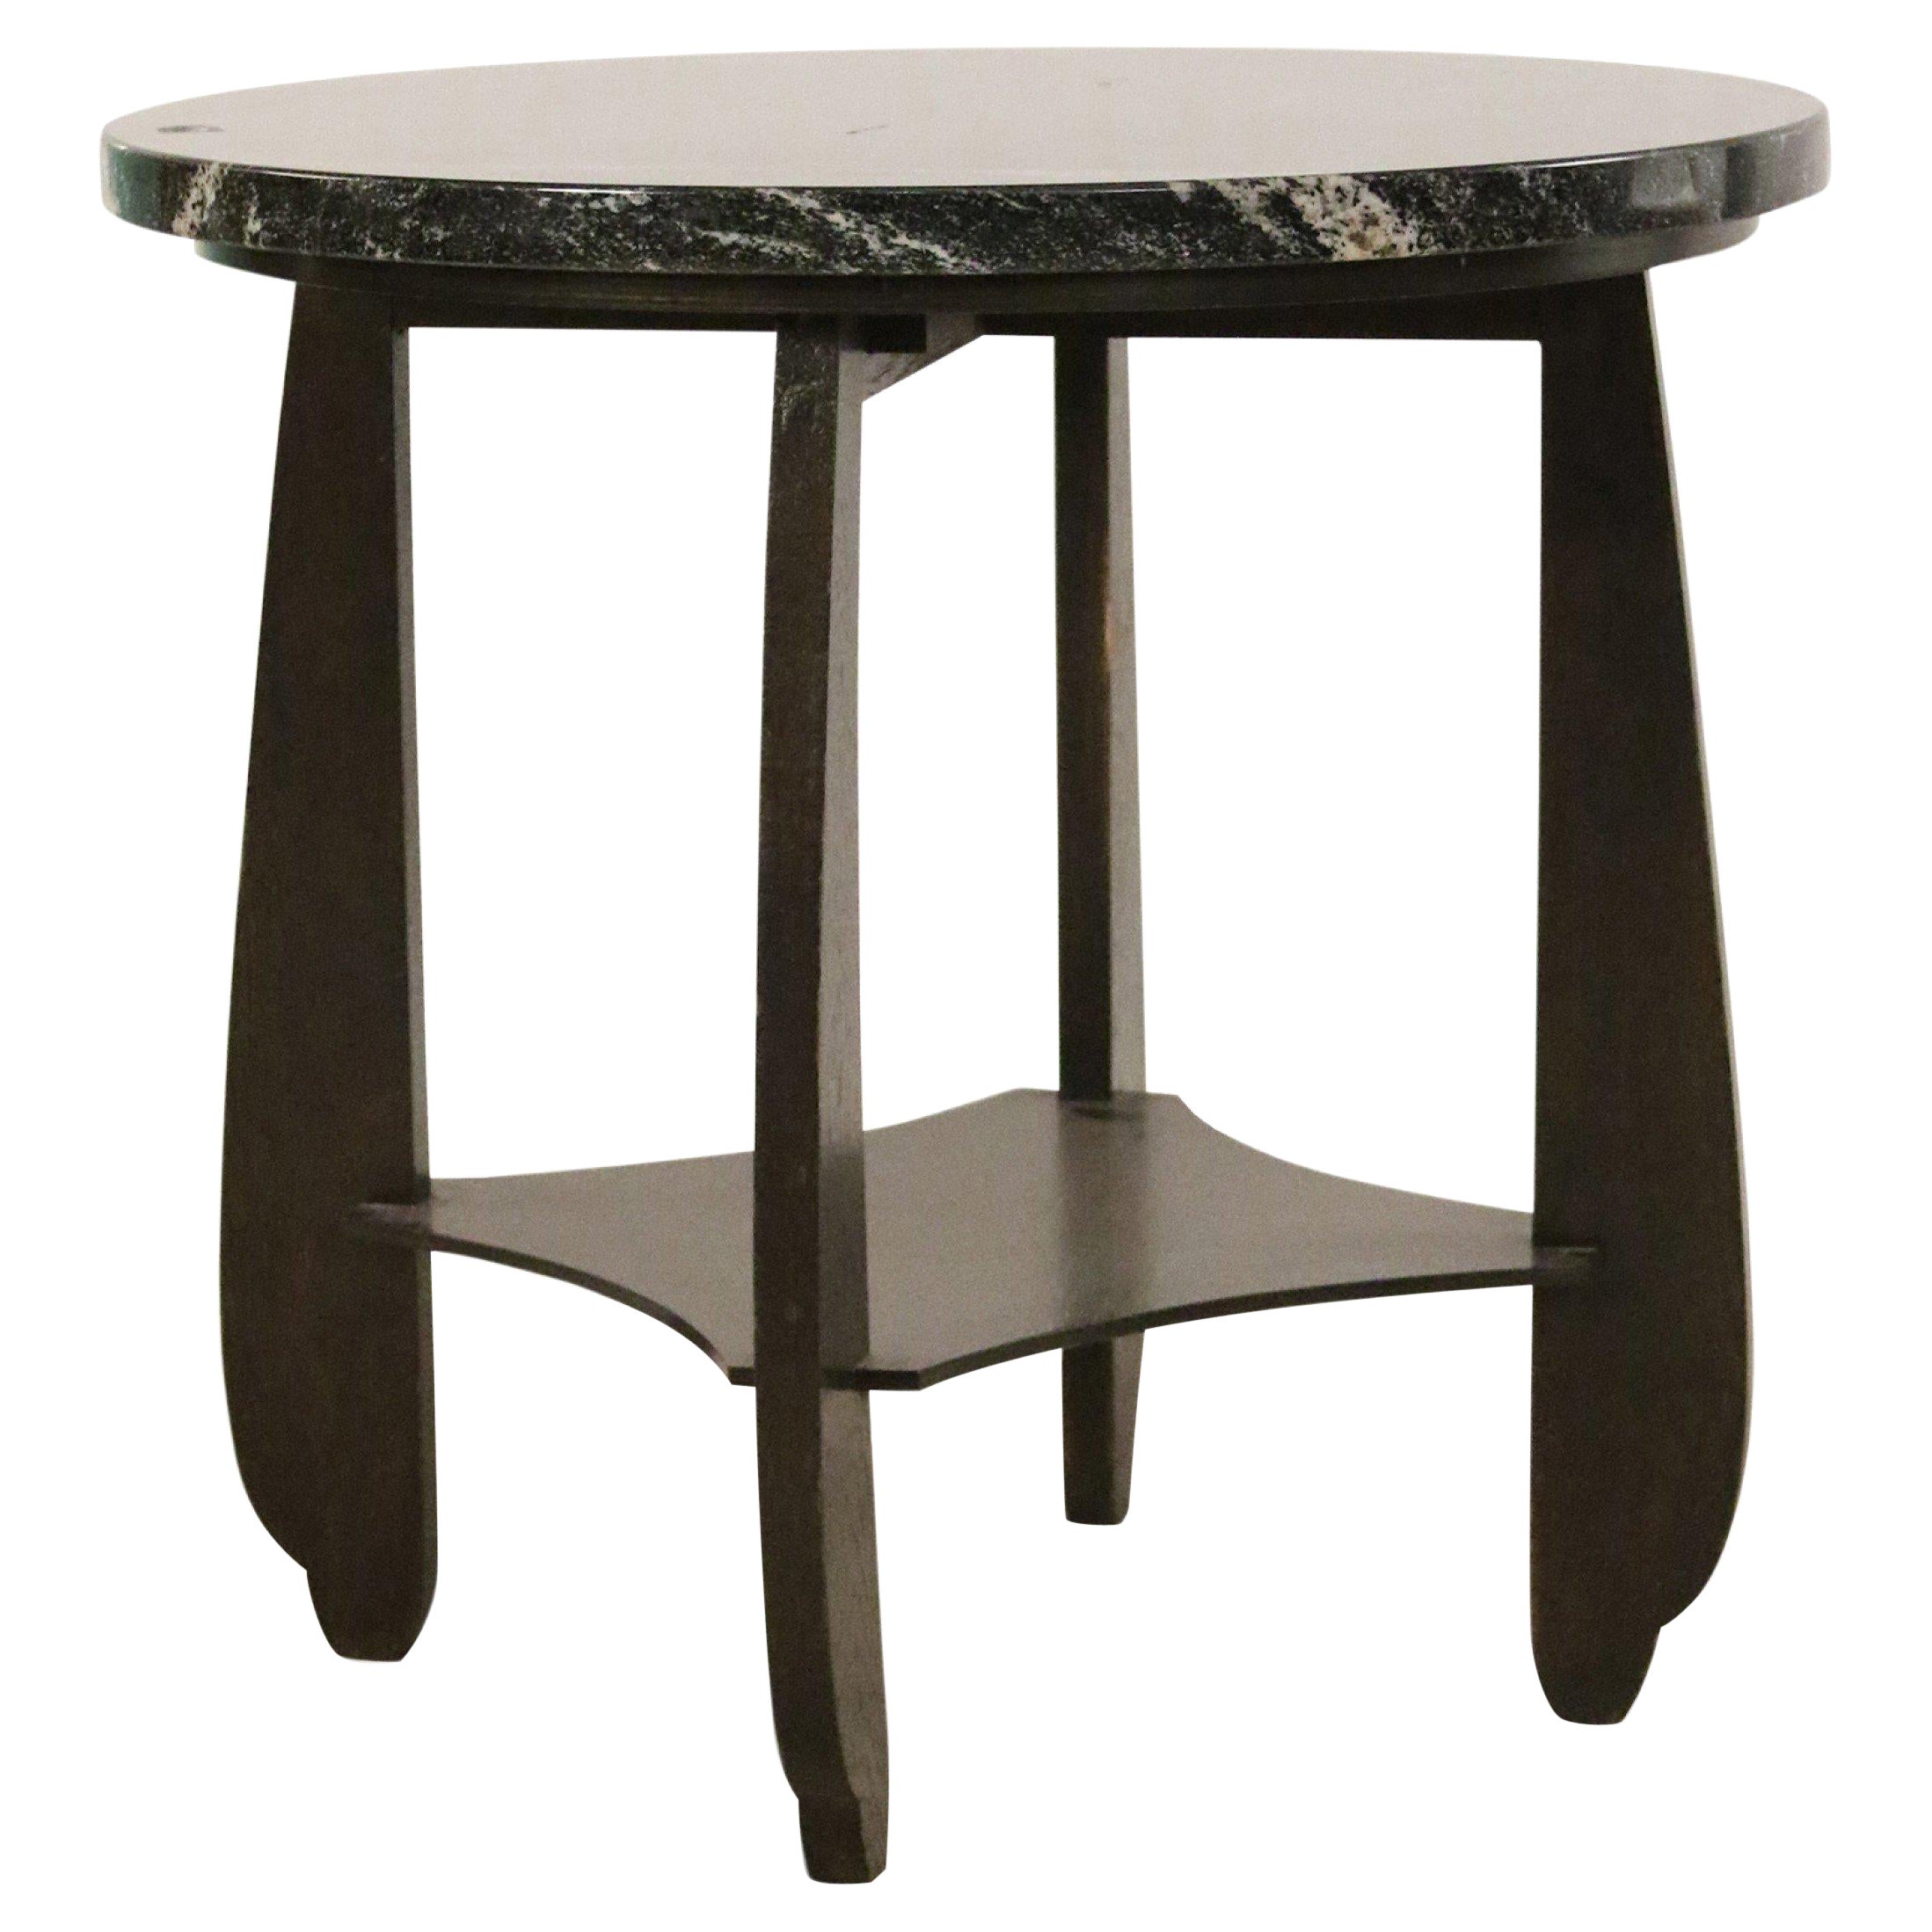 American Art Deco Style Round Marble and Lacquered Wood End Table